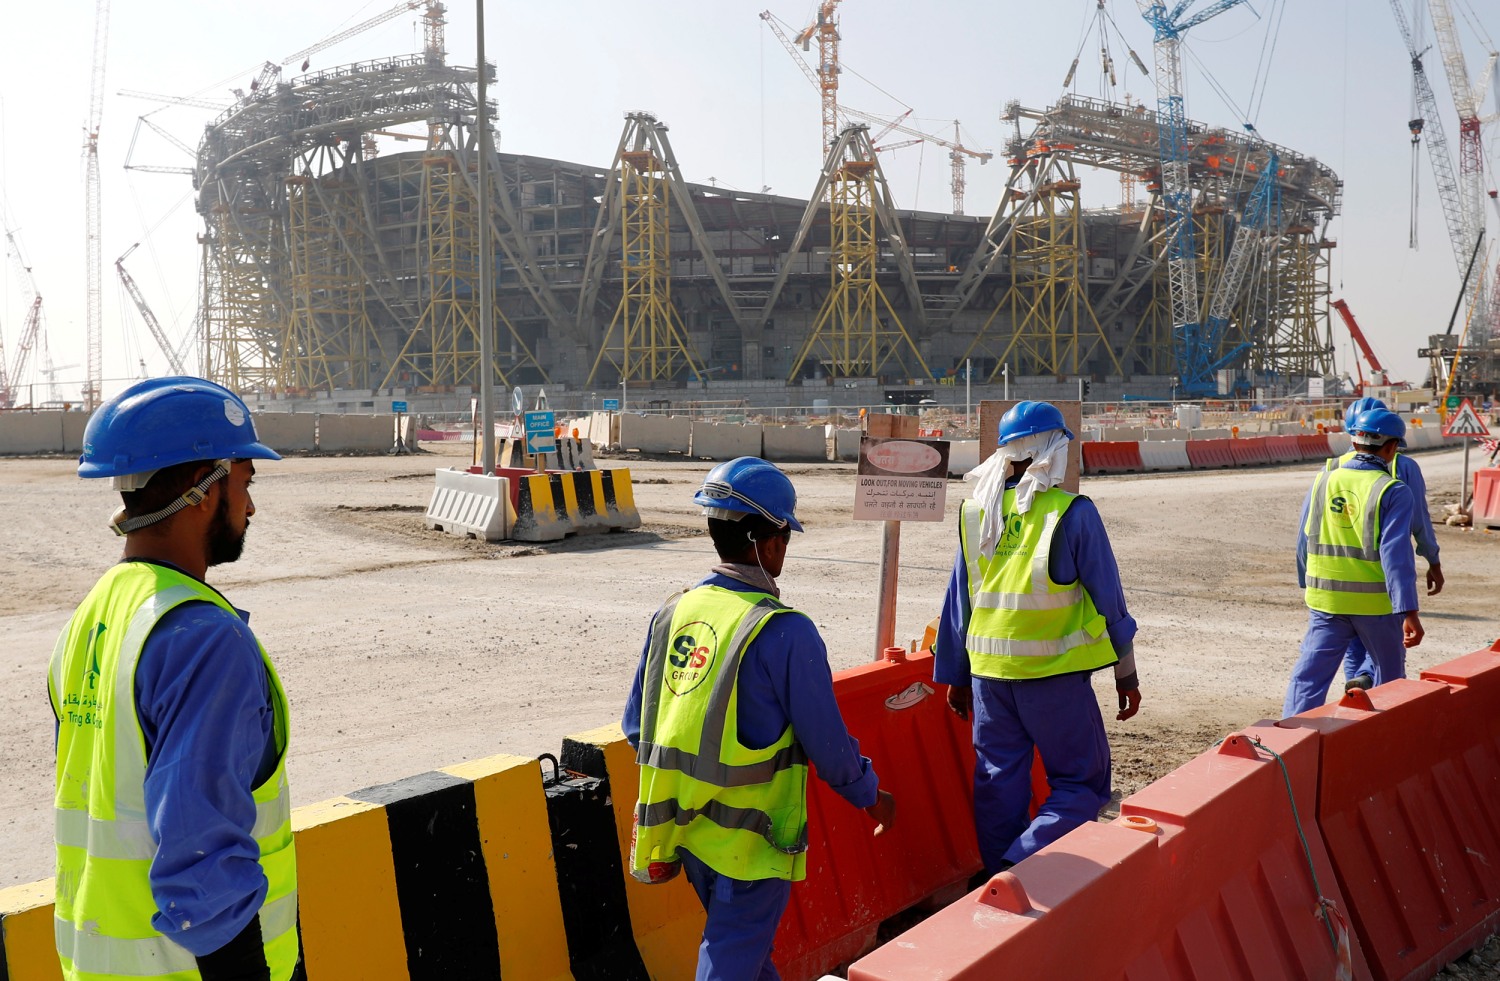 Migrant workers helped build Qatar's World Cup tournament, now they are  struggling to survive.